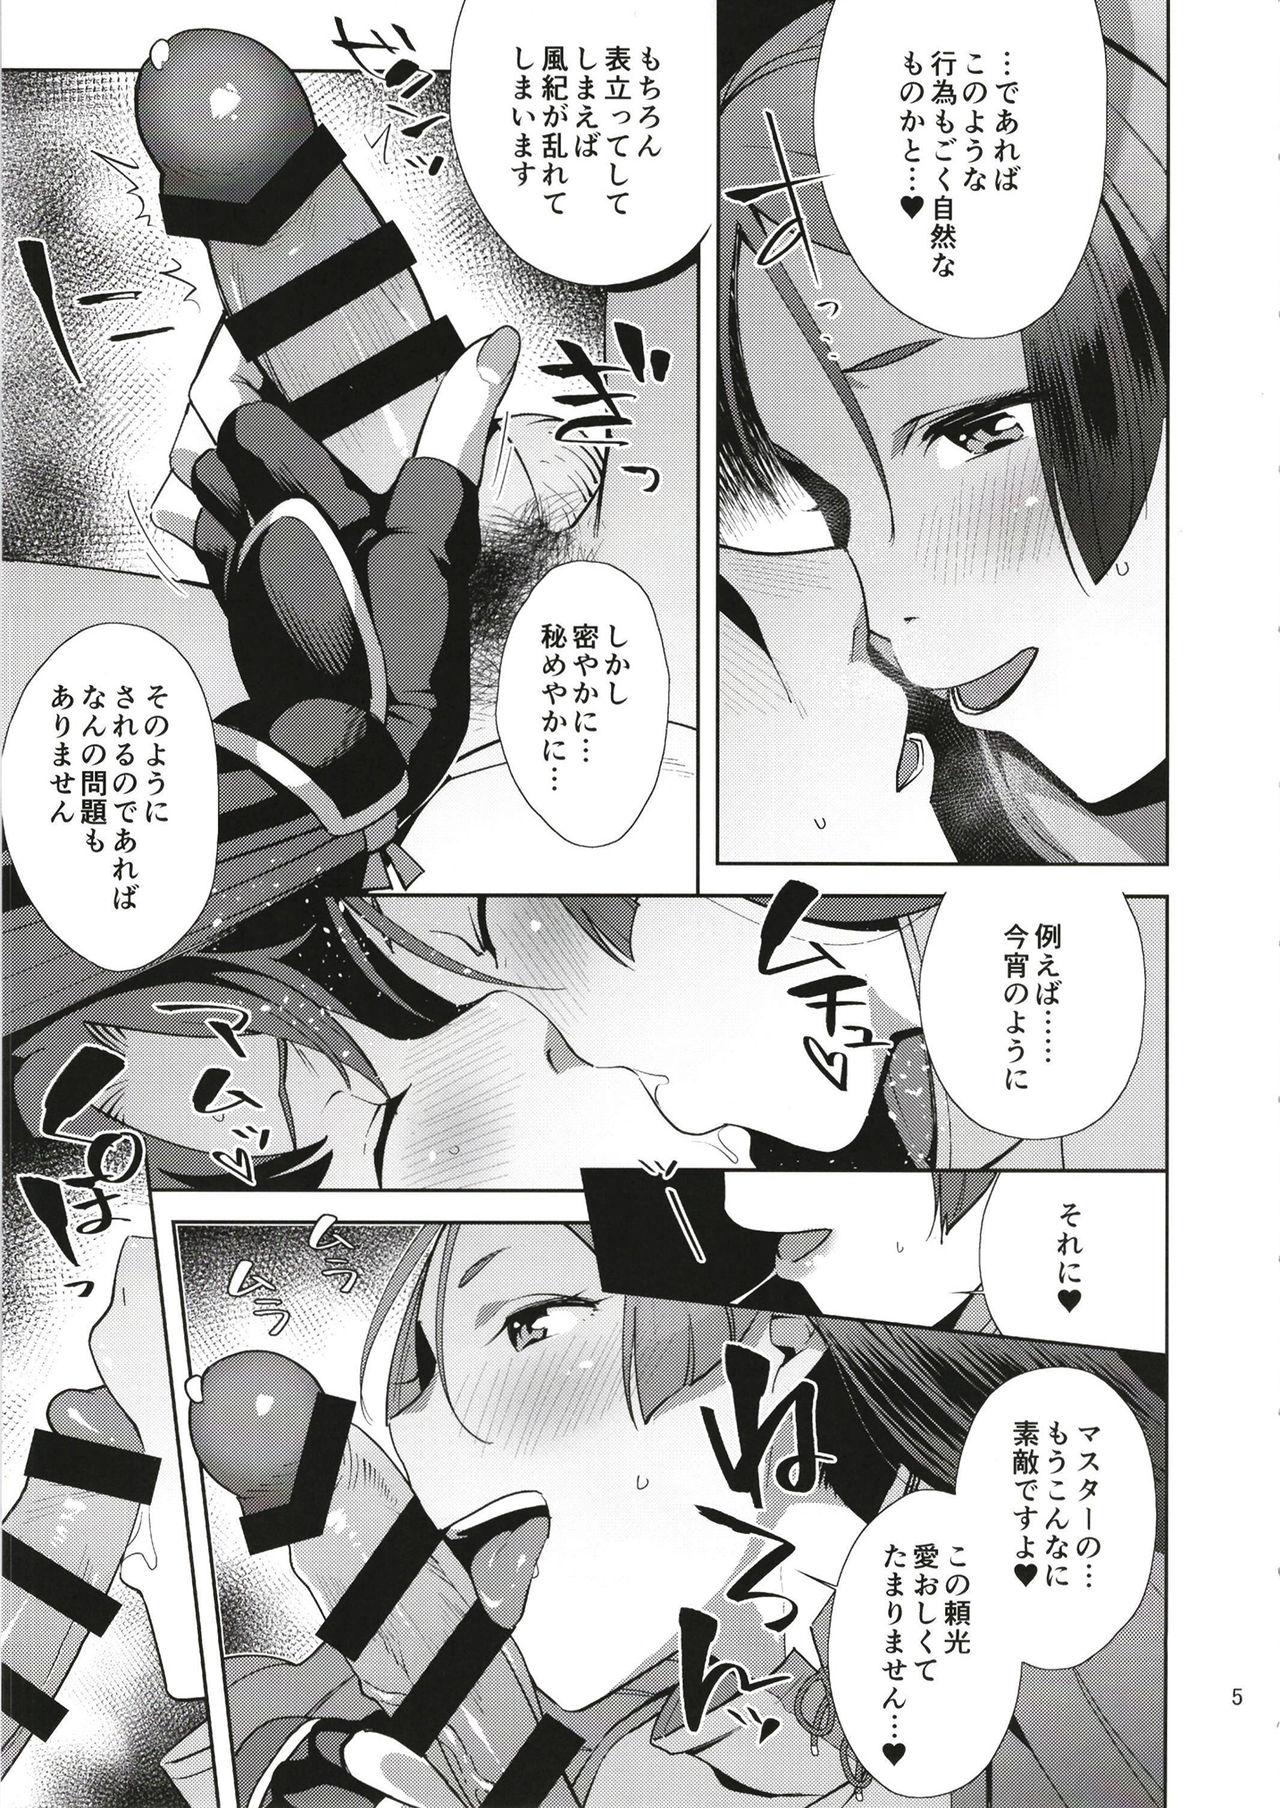 Face Sitting Raikou Sentimental - Fate grand order Buttfucking - Page 4